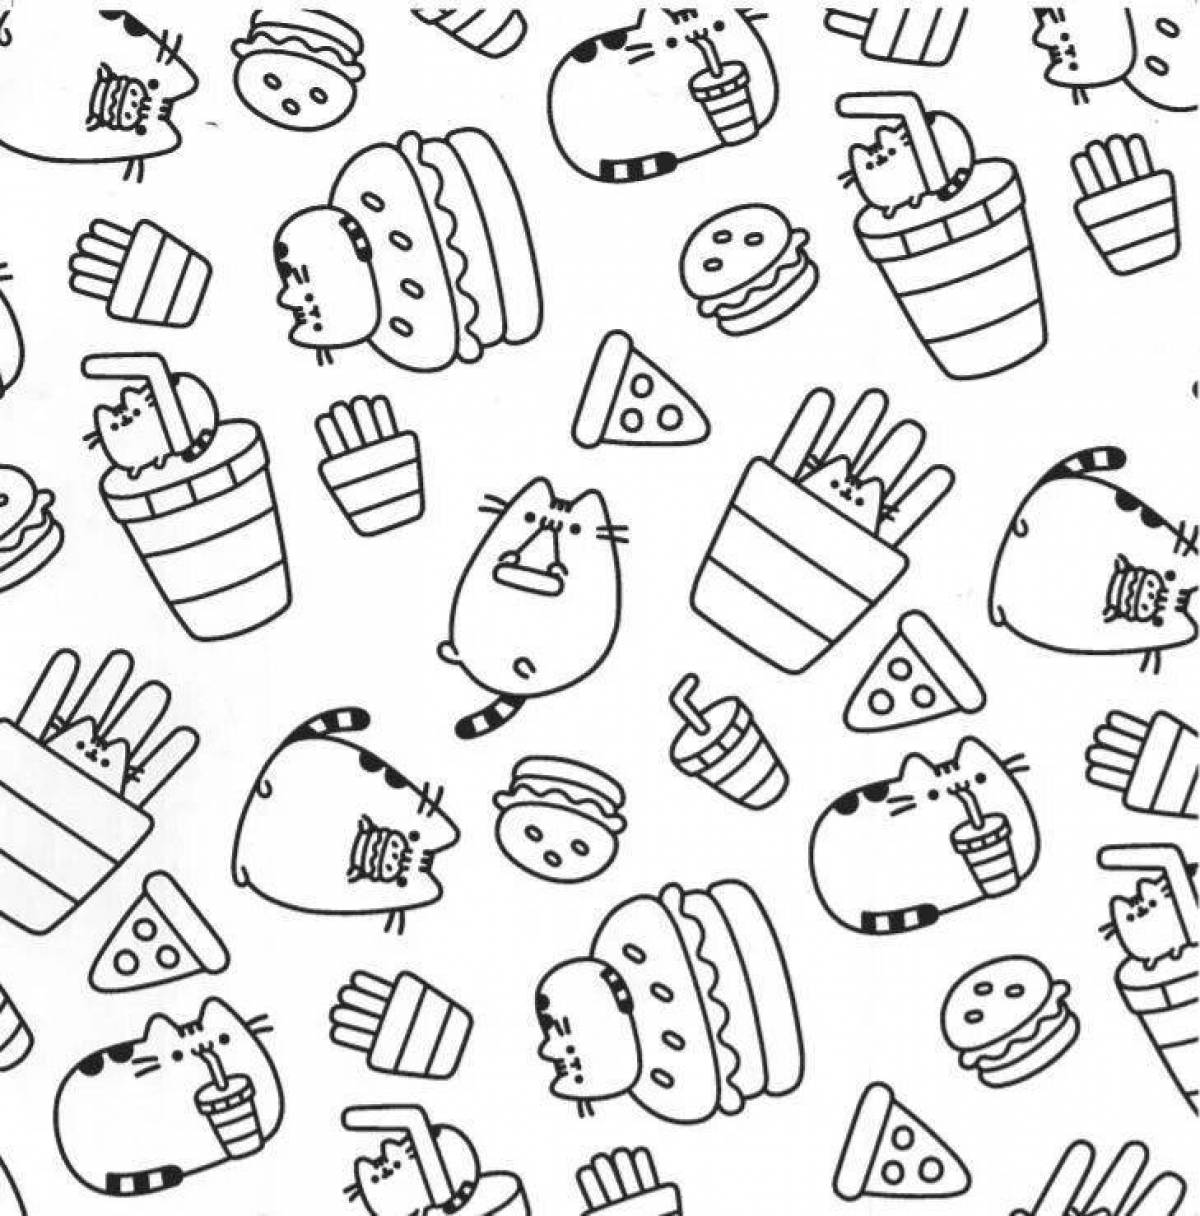 Wonderful coloring pages for stickers